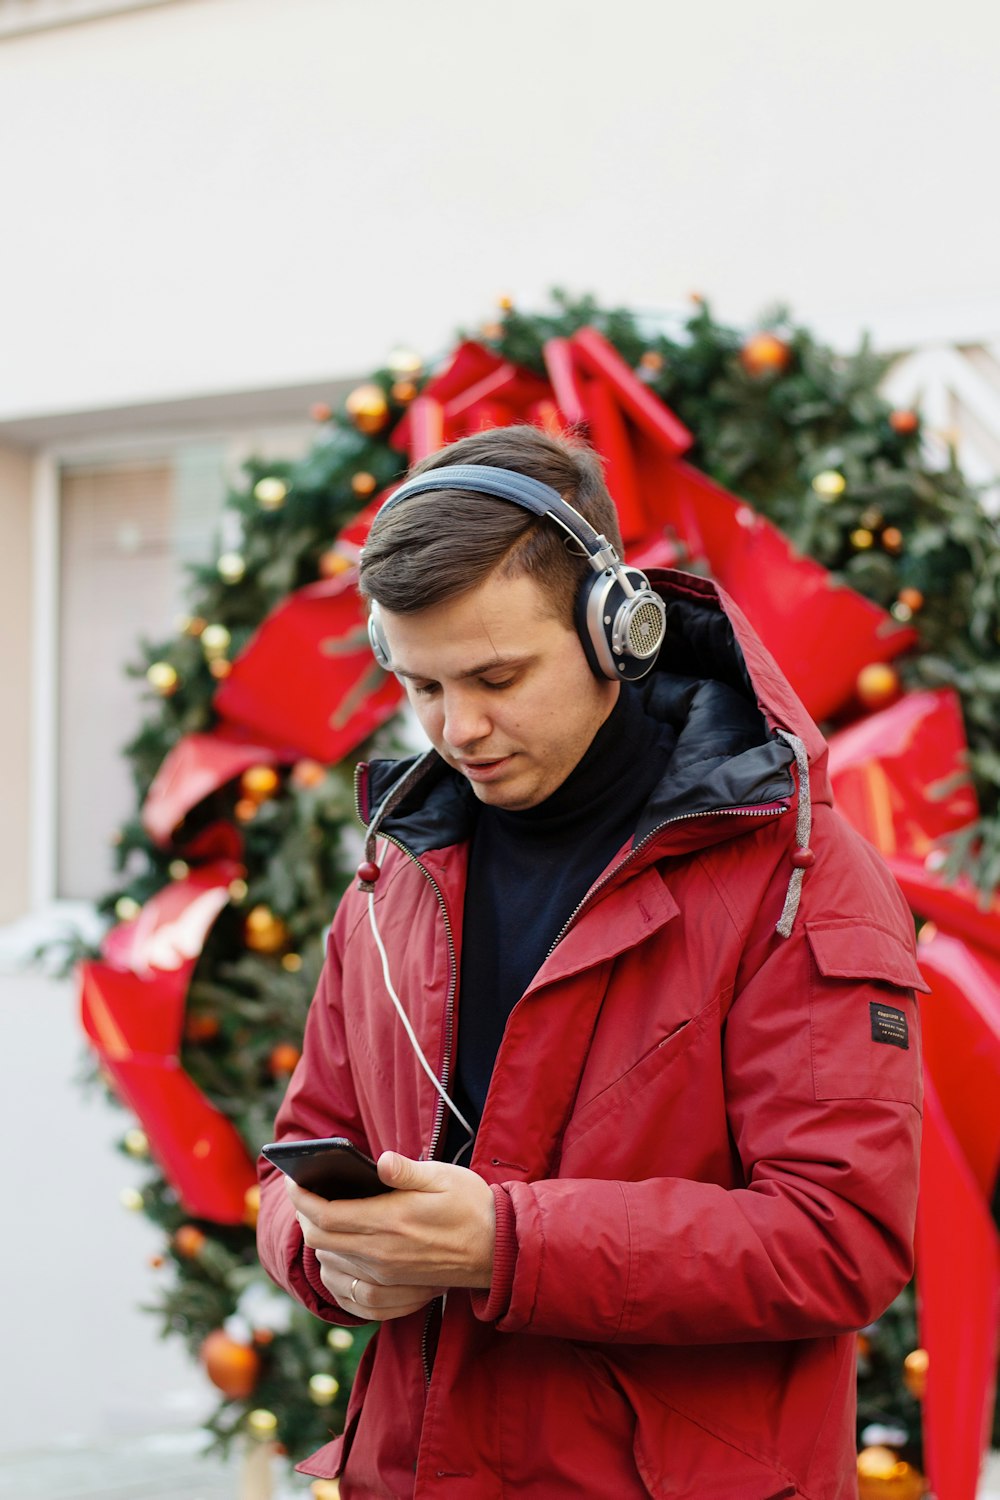 a man in a red jacket listening to headphones